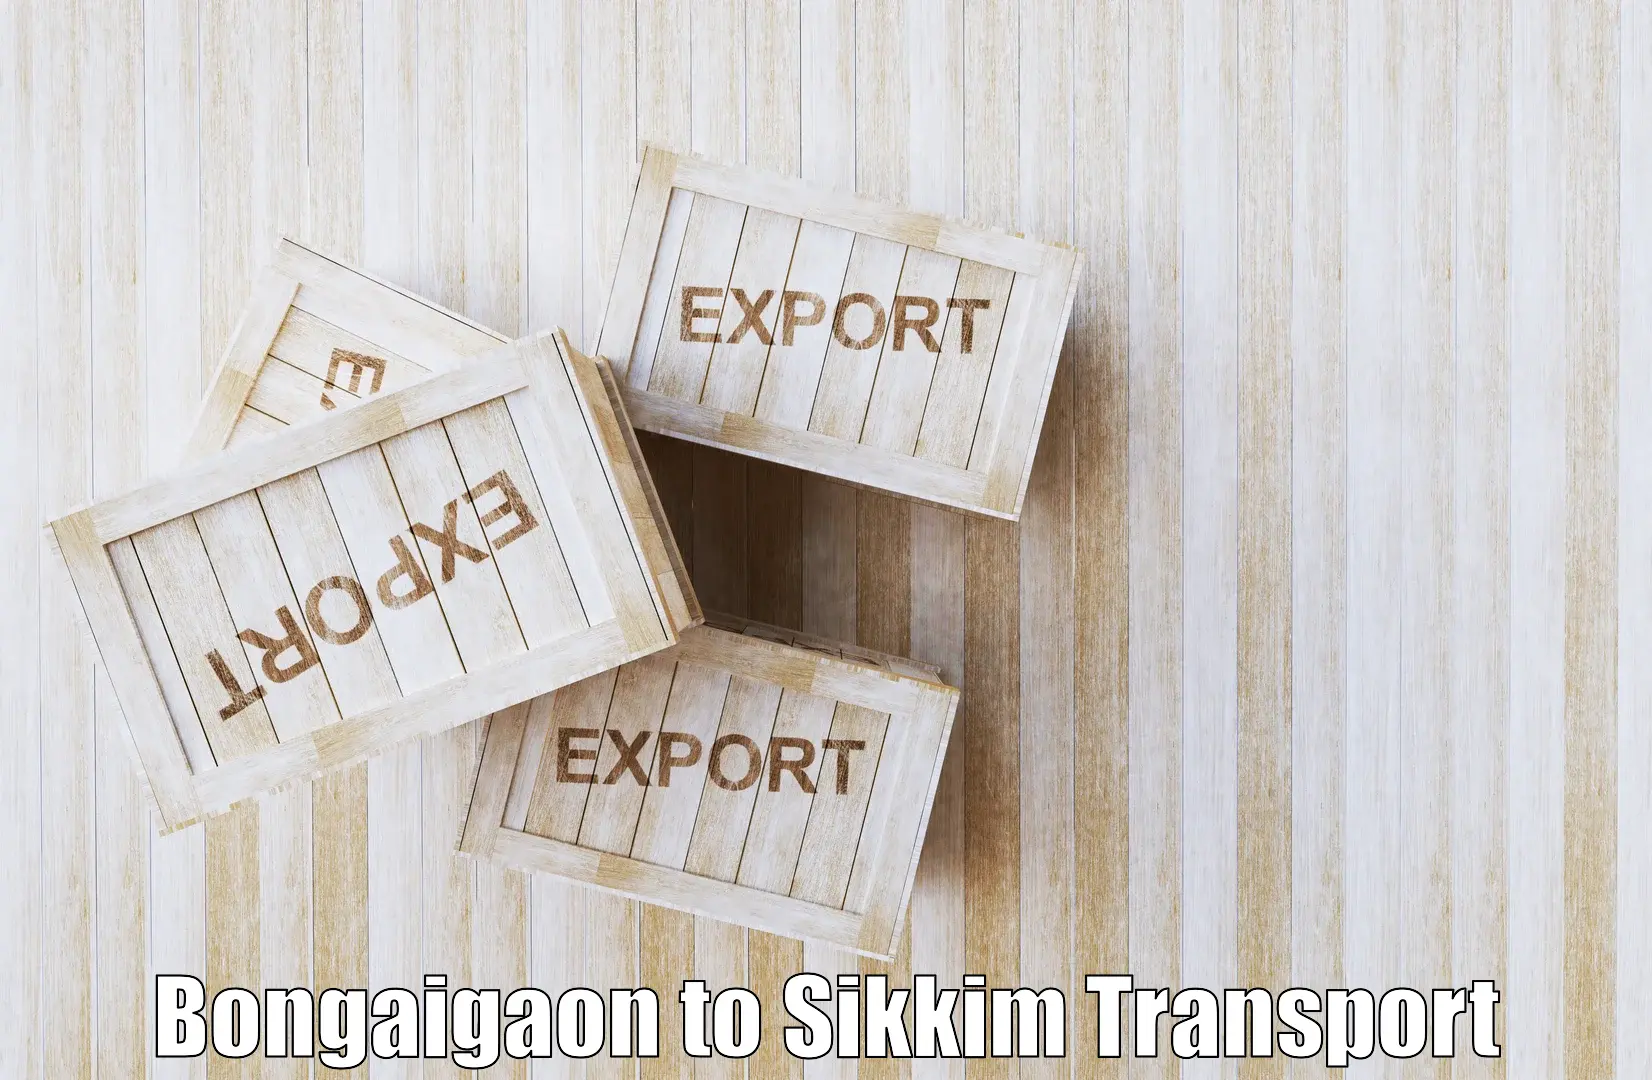 Goods transport services in Bongaigaon to Gangtok